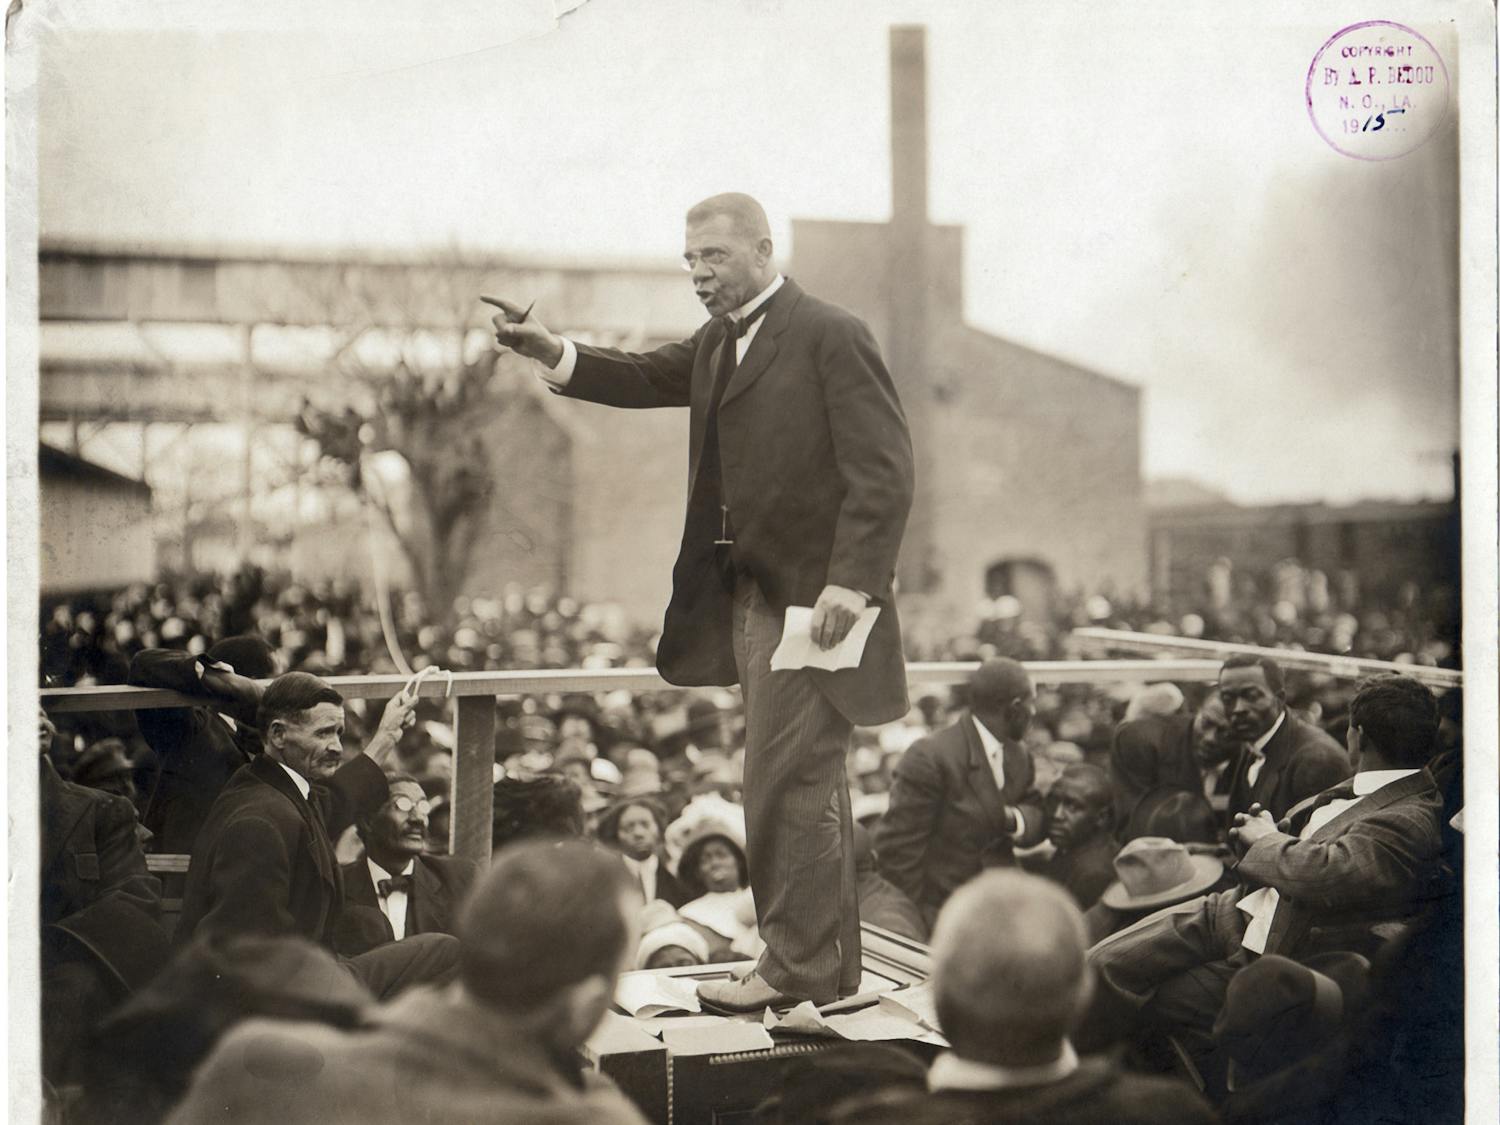 American educator, economist, and industrialist Booker T Washington (1856 - 1915), speaks to a large crowd during his last pilgrimage in Louisiana, during one of his southern educational tours, circa 1915. Washington founded the Tuskegee Institute in Alabama. (Photo by Arthur P. Bedou/Robert Abbott Sengstacke/Getty Images)